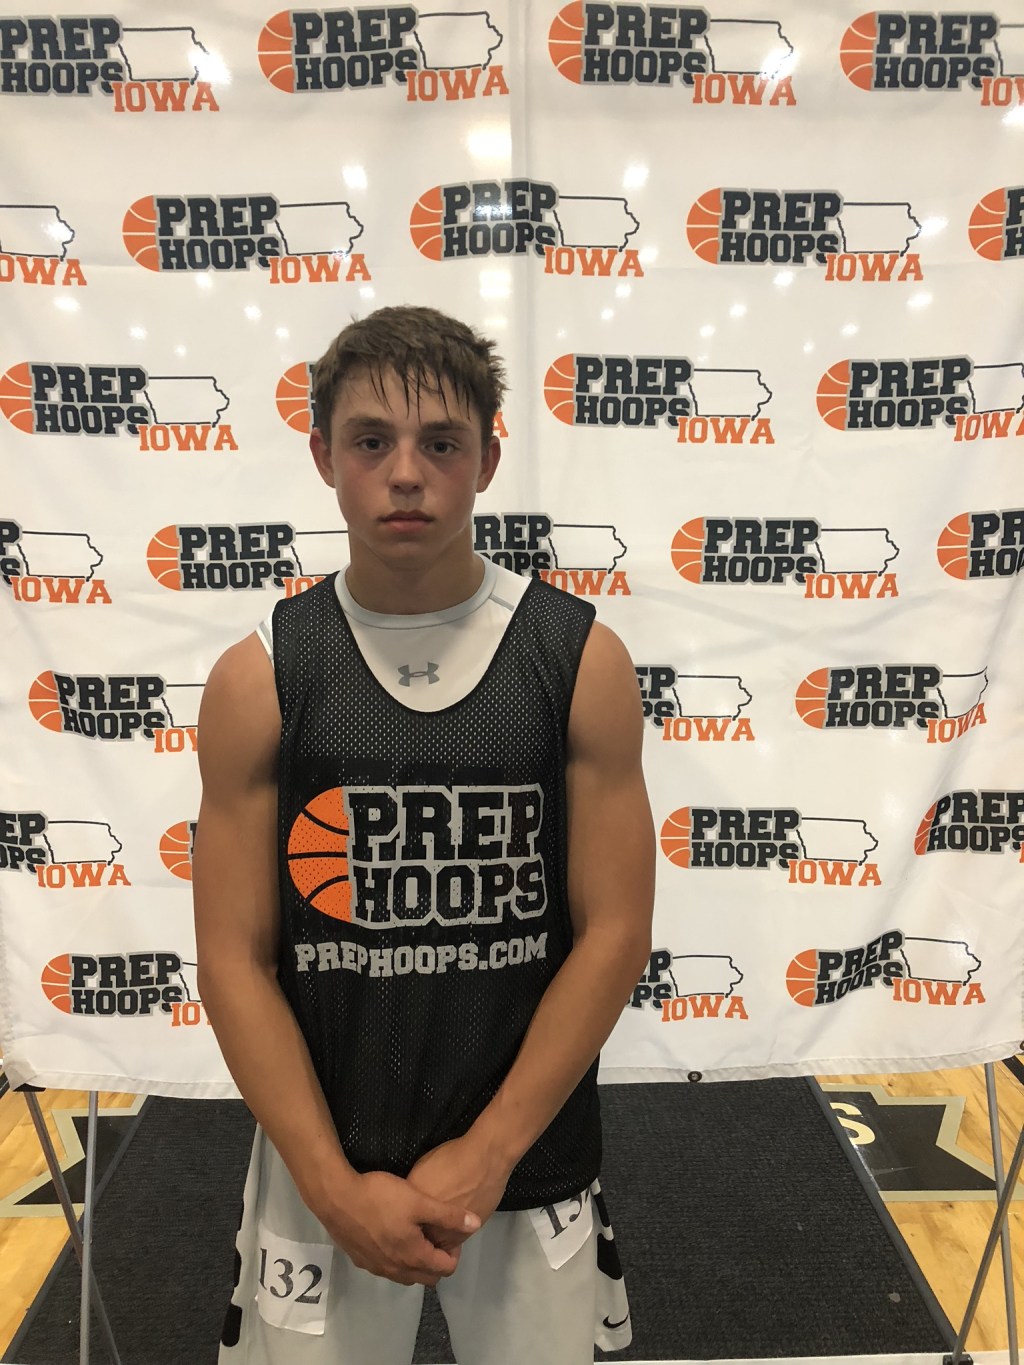 South Iowa Cedar Conference: Class Of 2021's Who Should Be Valued